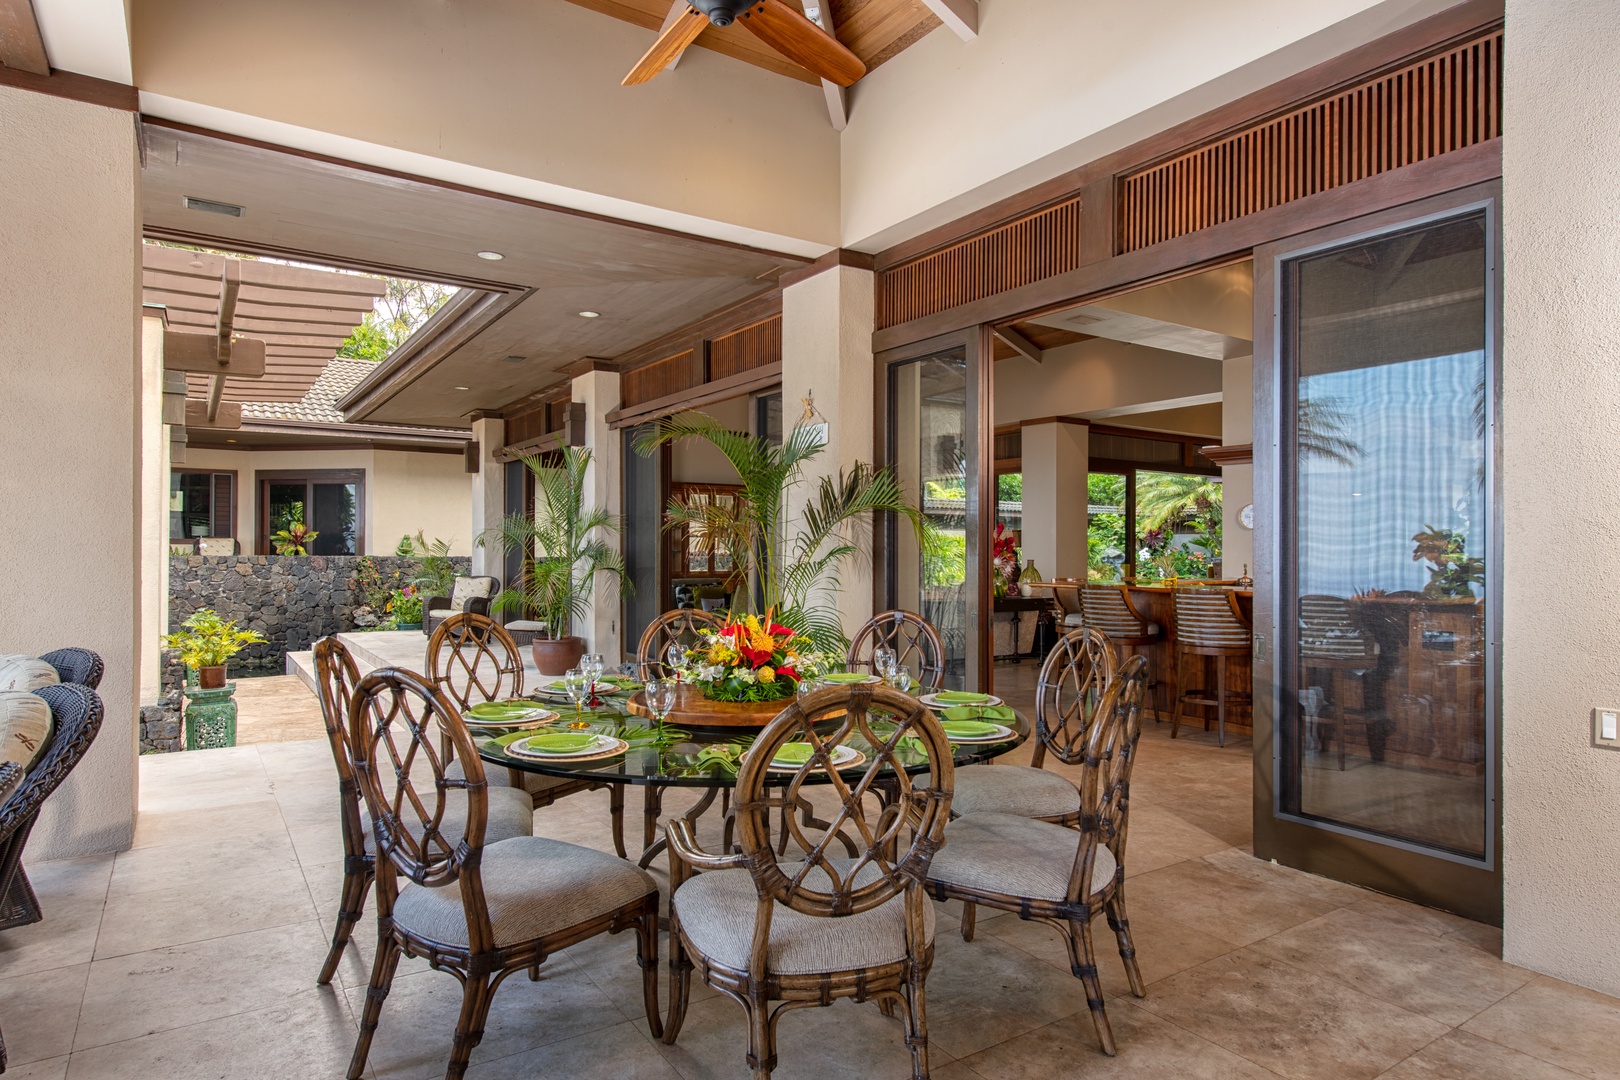 Kailua Kona Vacation Rentals, Hale Wailele** - Alfresco Dining on the extensive connected patios